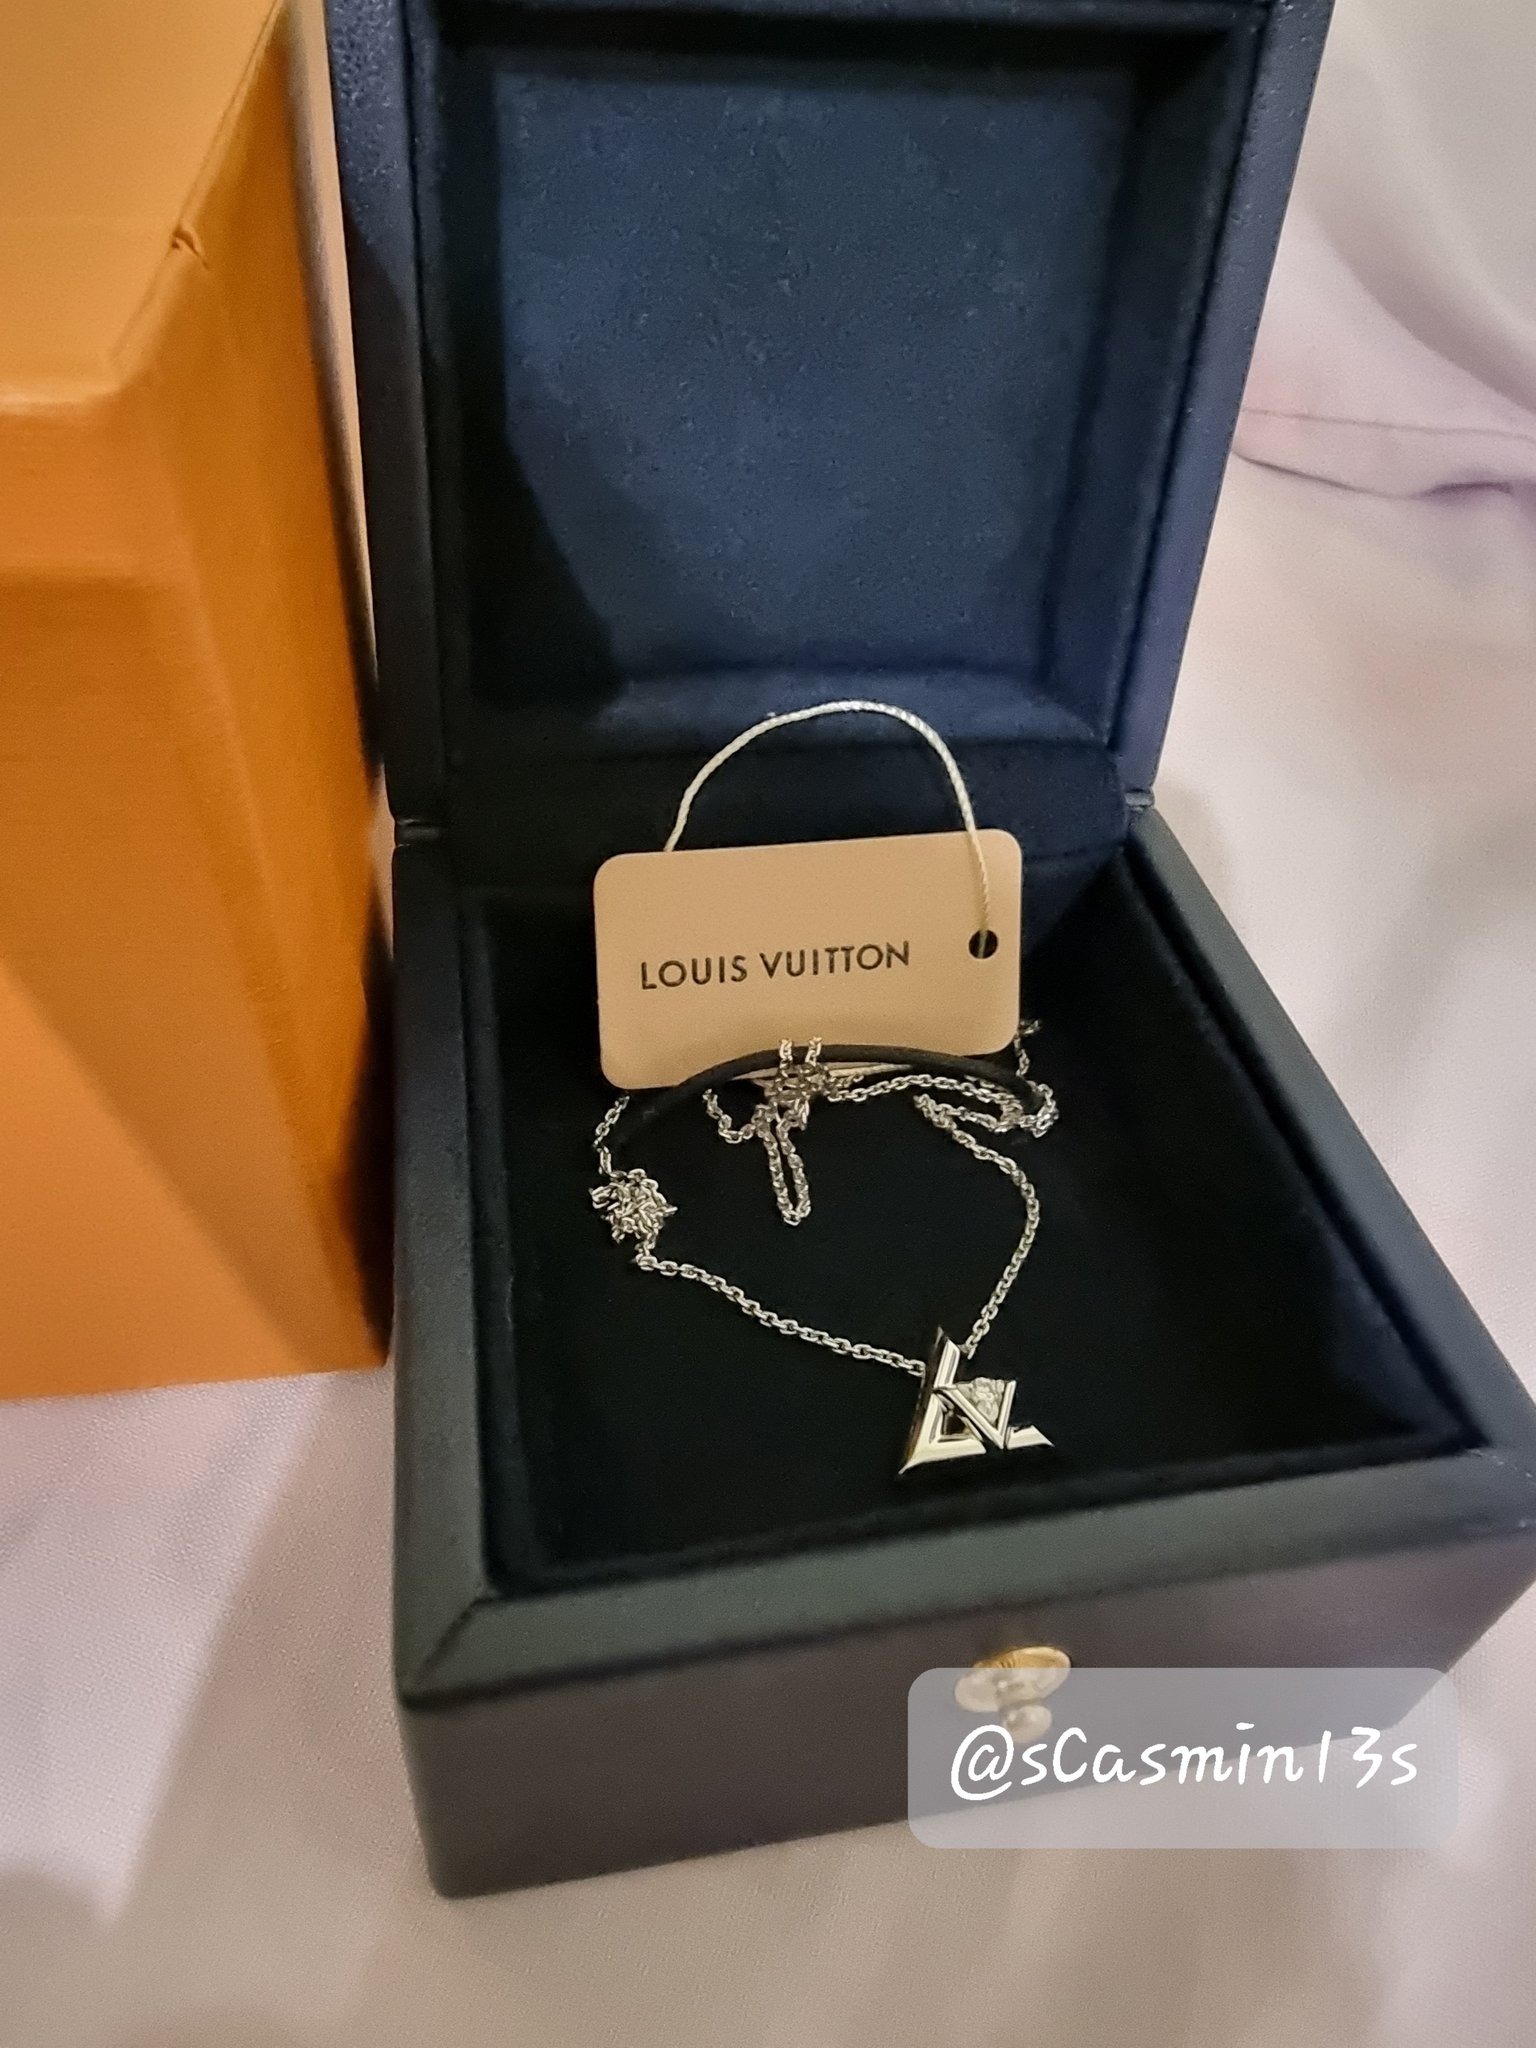 ⭐️💖 ~ Cas ~ Jimin~ 💖⭐️ on X: Really really love Brand King Jimin 's  taste in fashion. Because of Jimin, I bought the bracelet for this  Essential V series. It's so